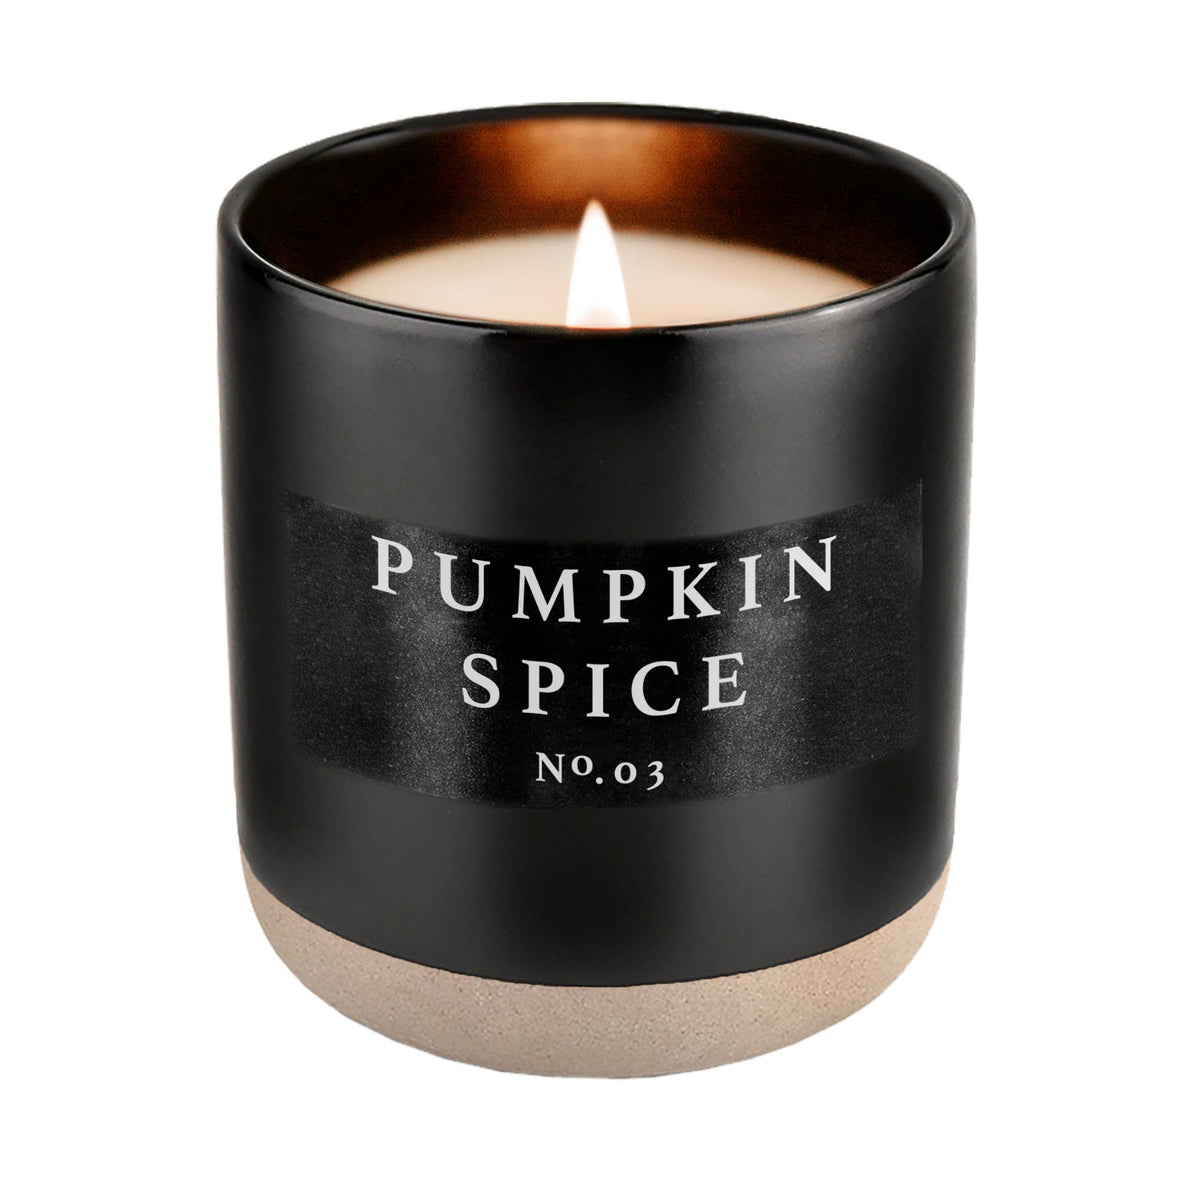 Pumpkin Spice 12 oz Soy Candle - Fall Home Decor & Gifts